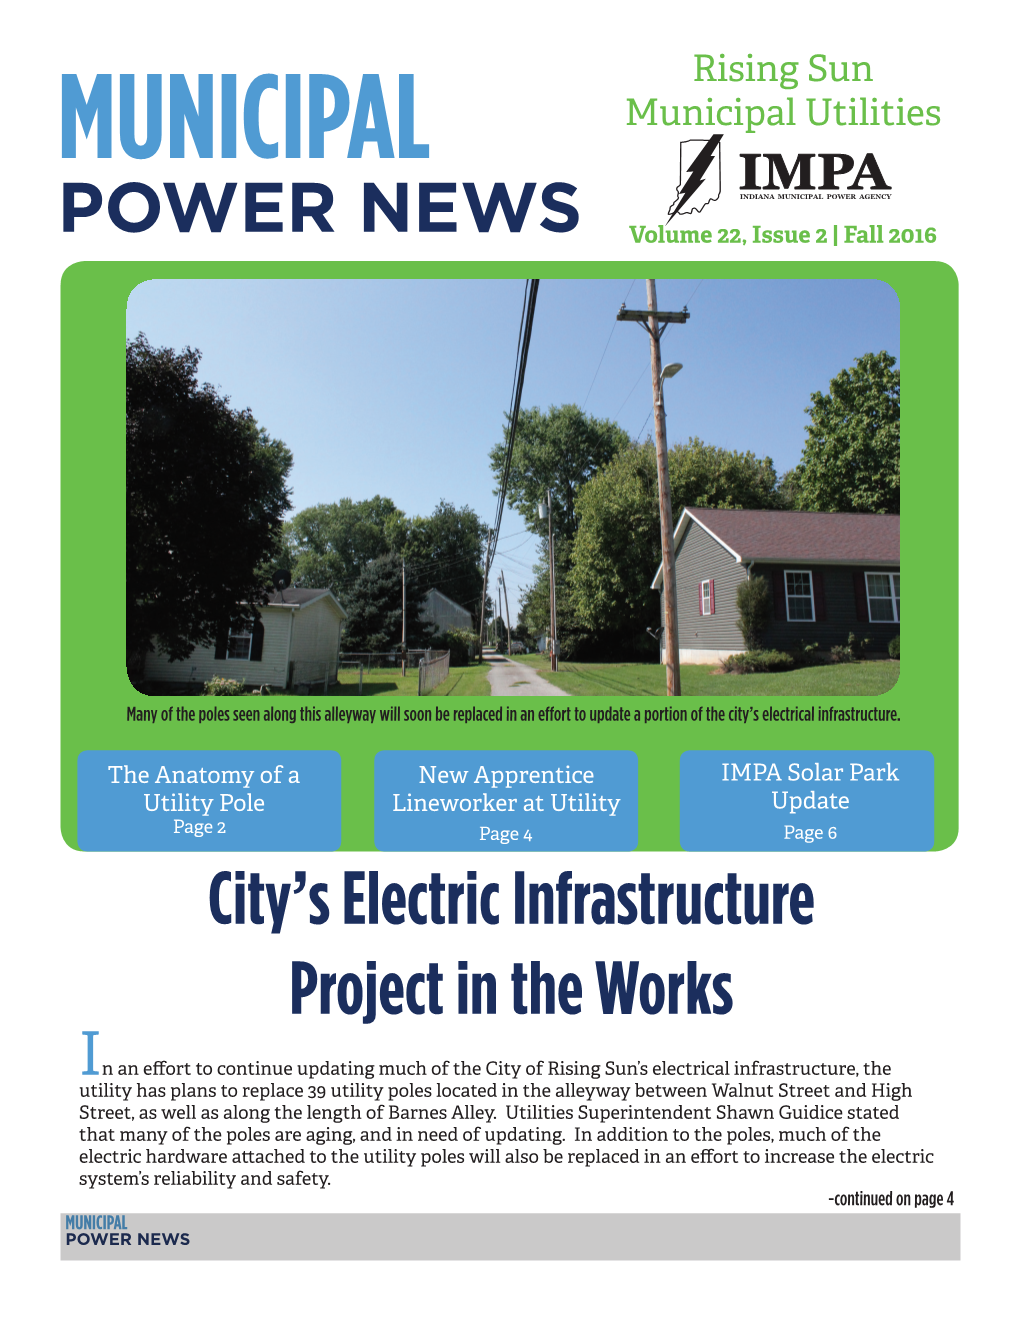 City's Electric Infrastructure Project in the Works